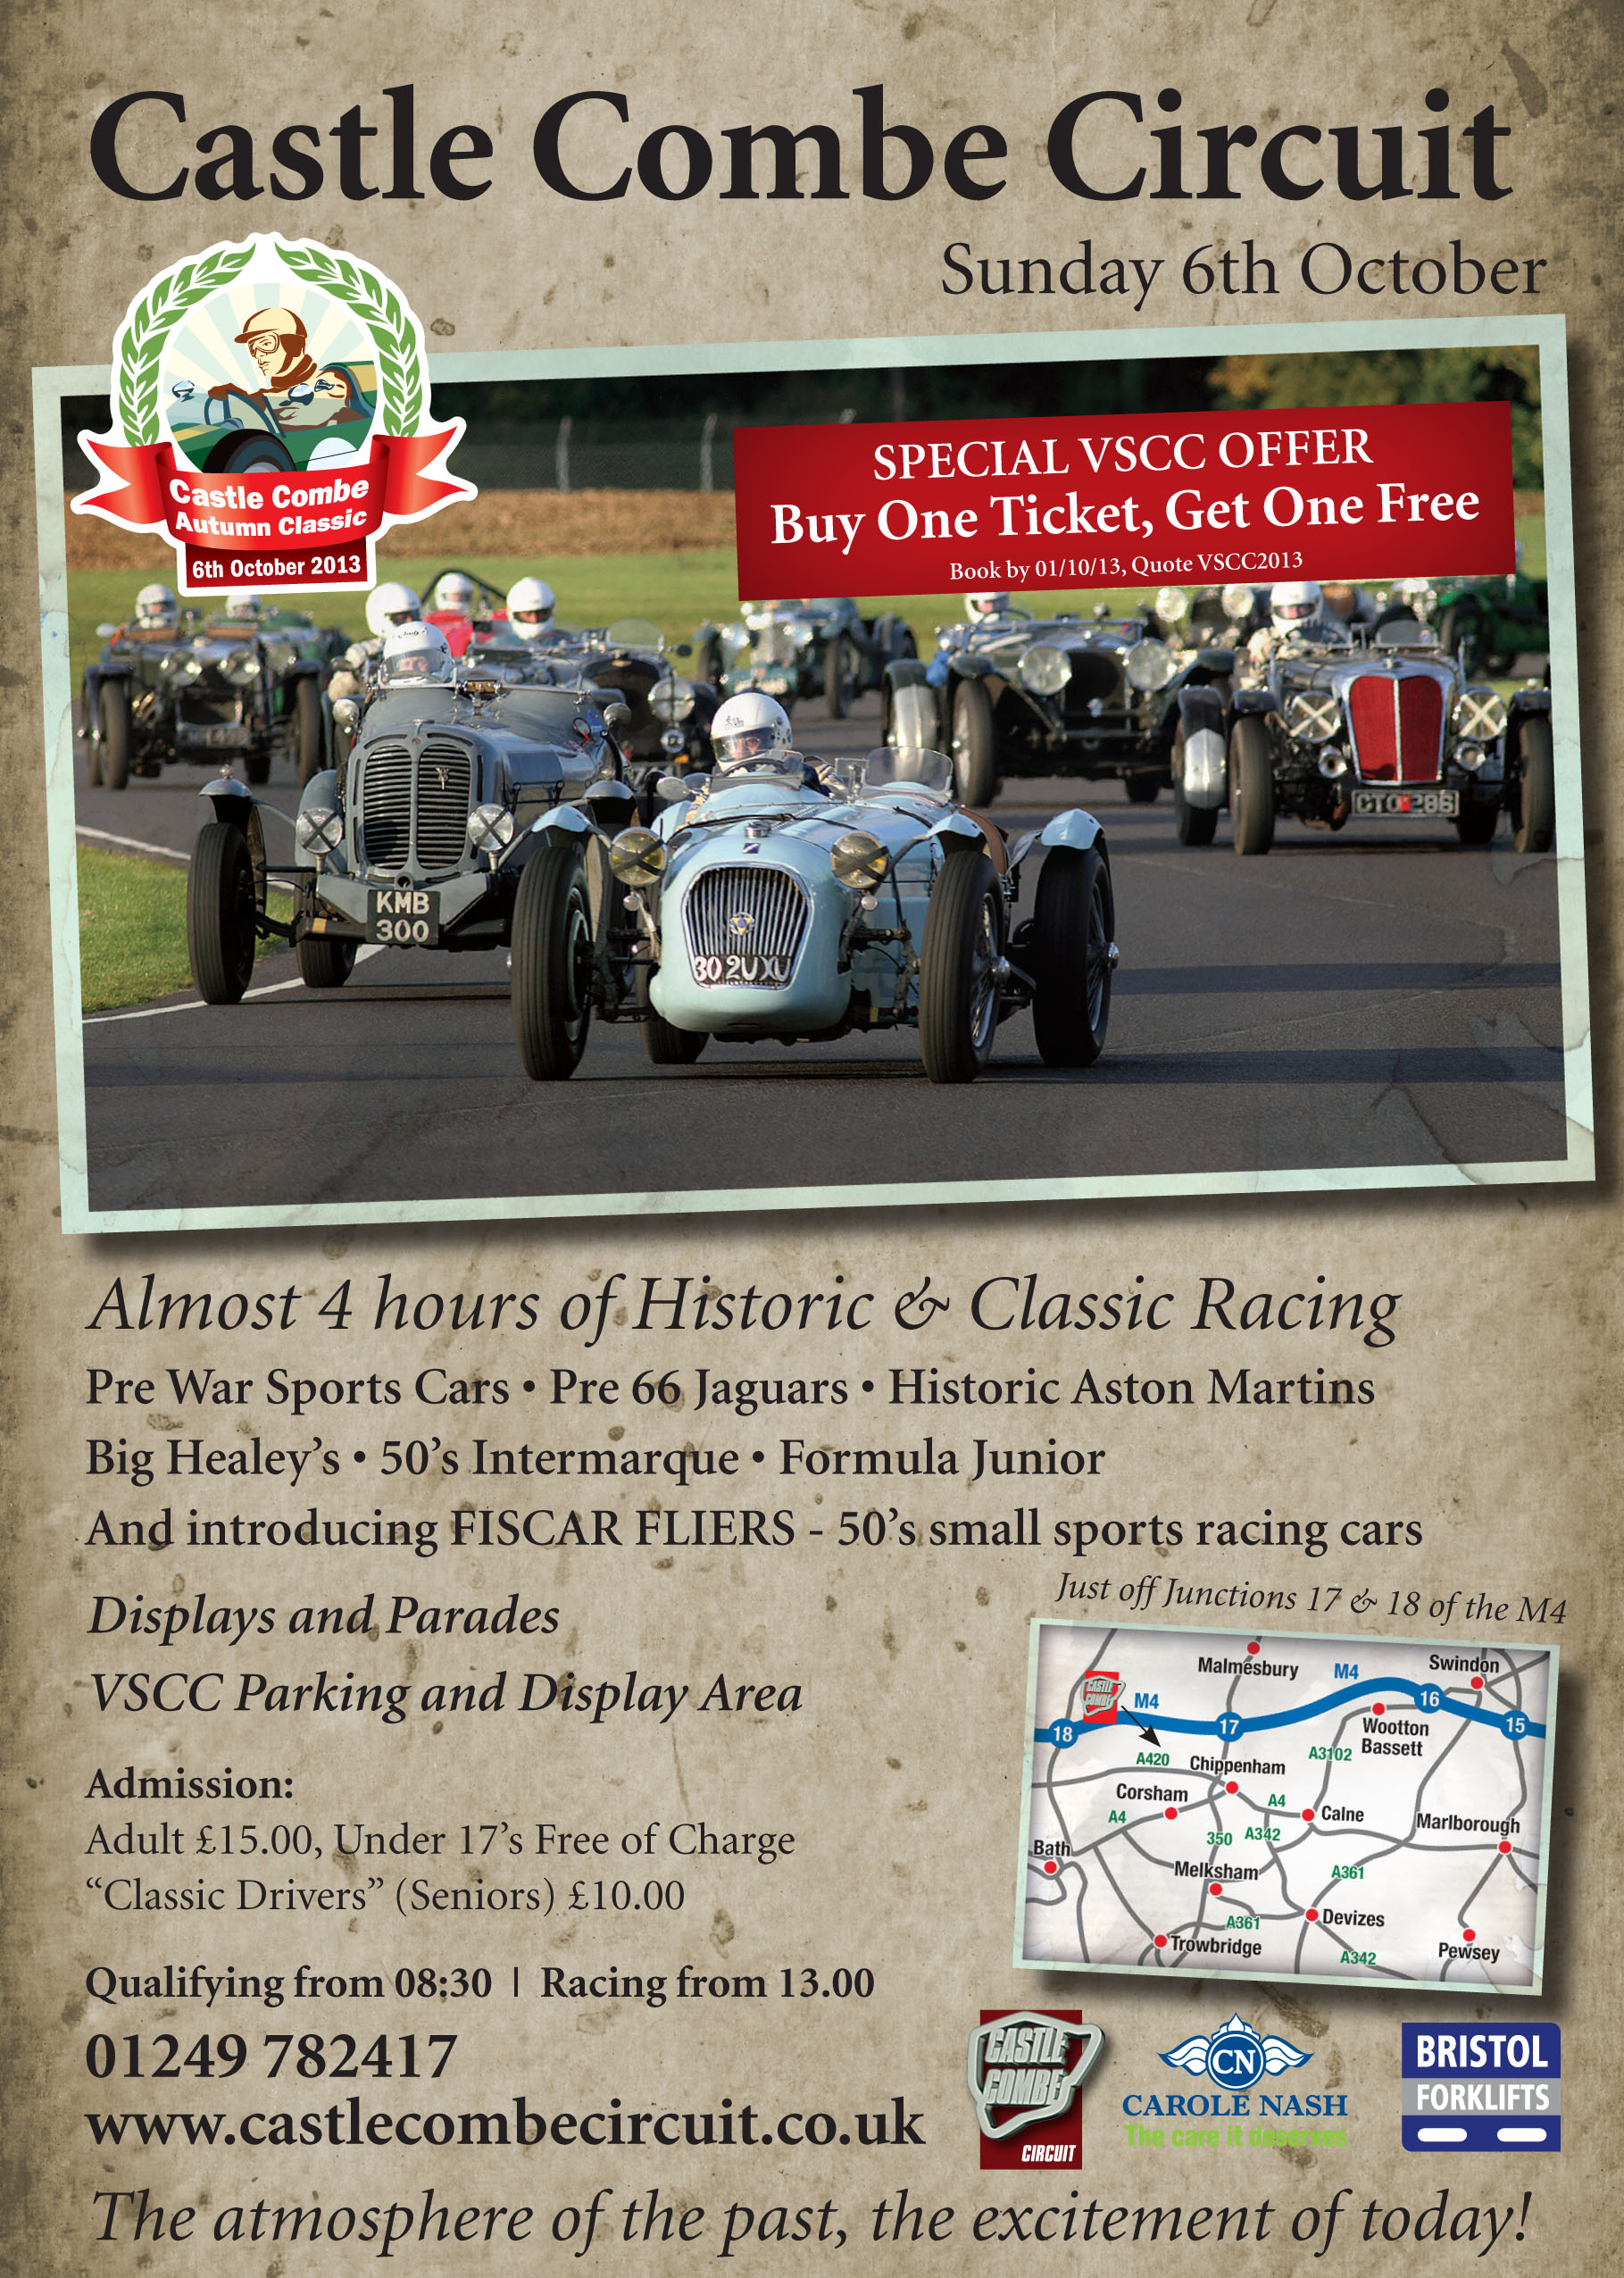 VSCC to headline Castle Combe ‘Autumn Classic’ Race Meeting with a Standard & Modified Pre-war Sports-Car (Set 3) Invitation Race cover